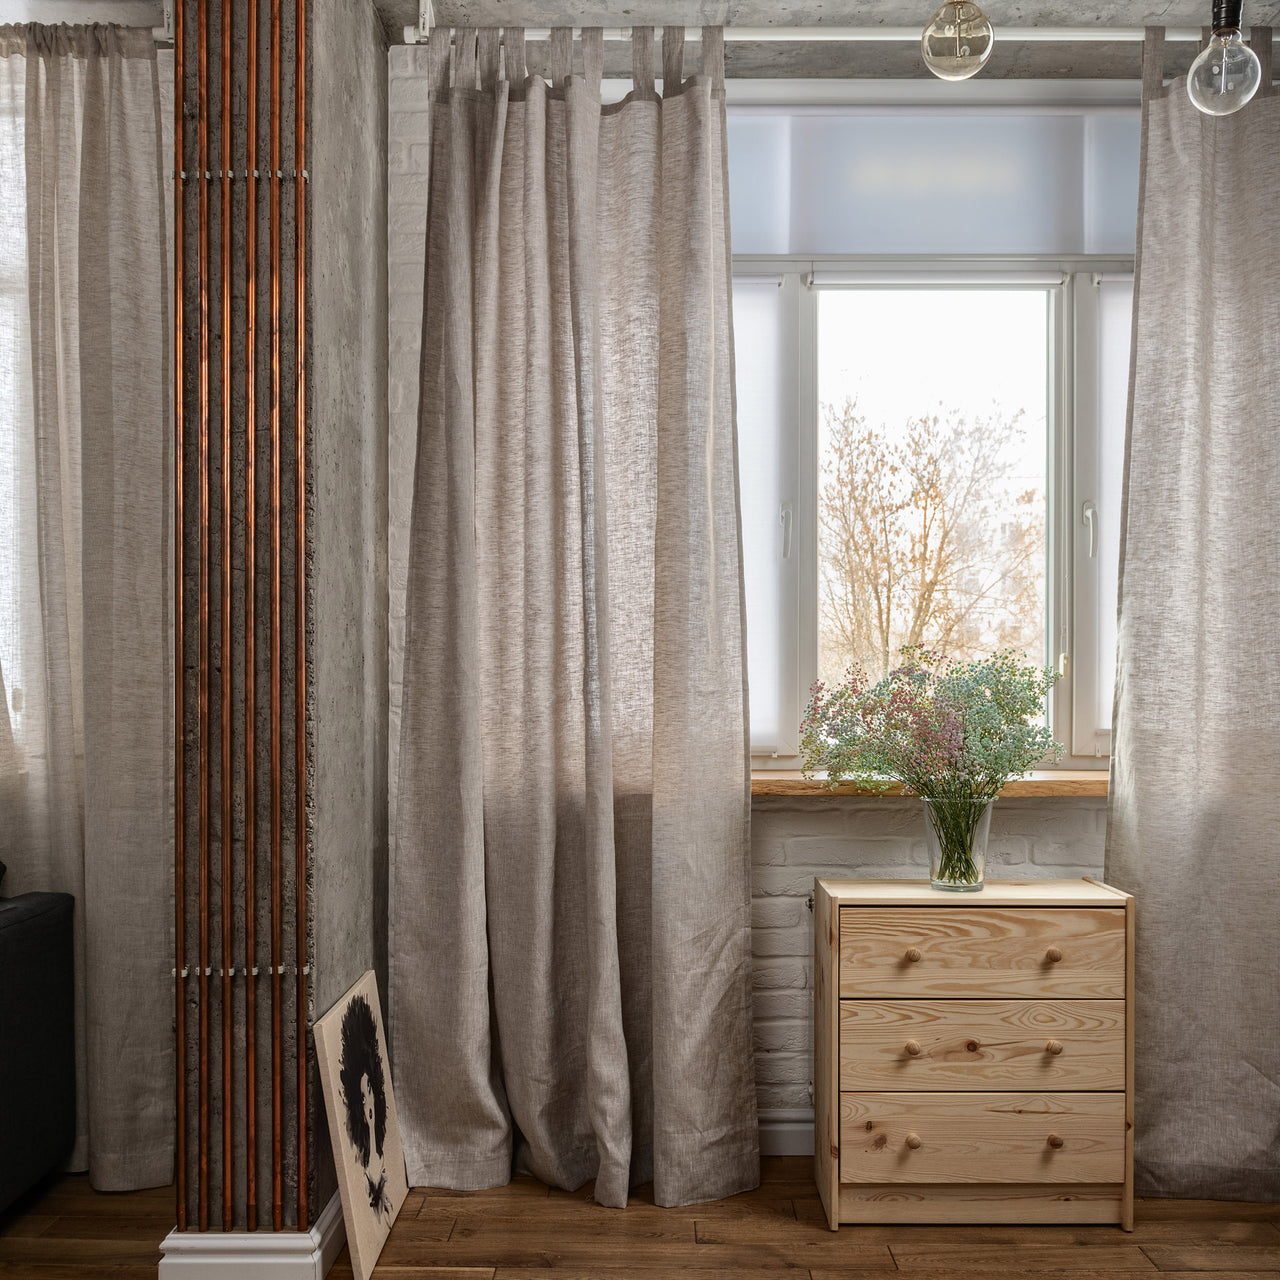 Linen Tab Top Curtain Panel - 124, 138 or 250 cm Width, Custom Length - Natural Linen Oatmeal/White/Grey Colours